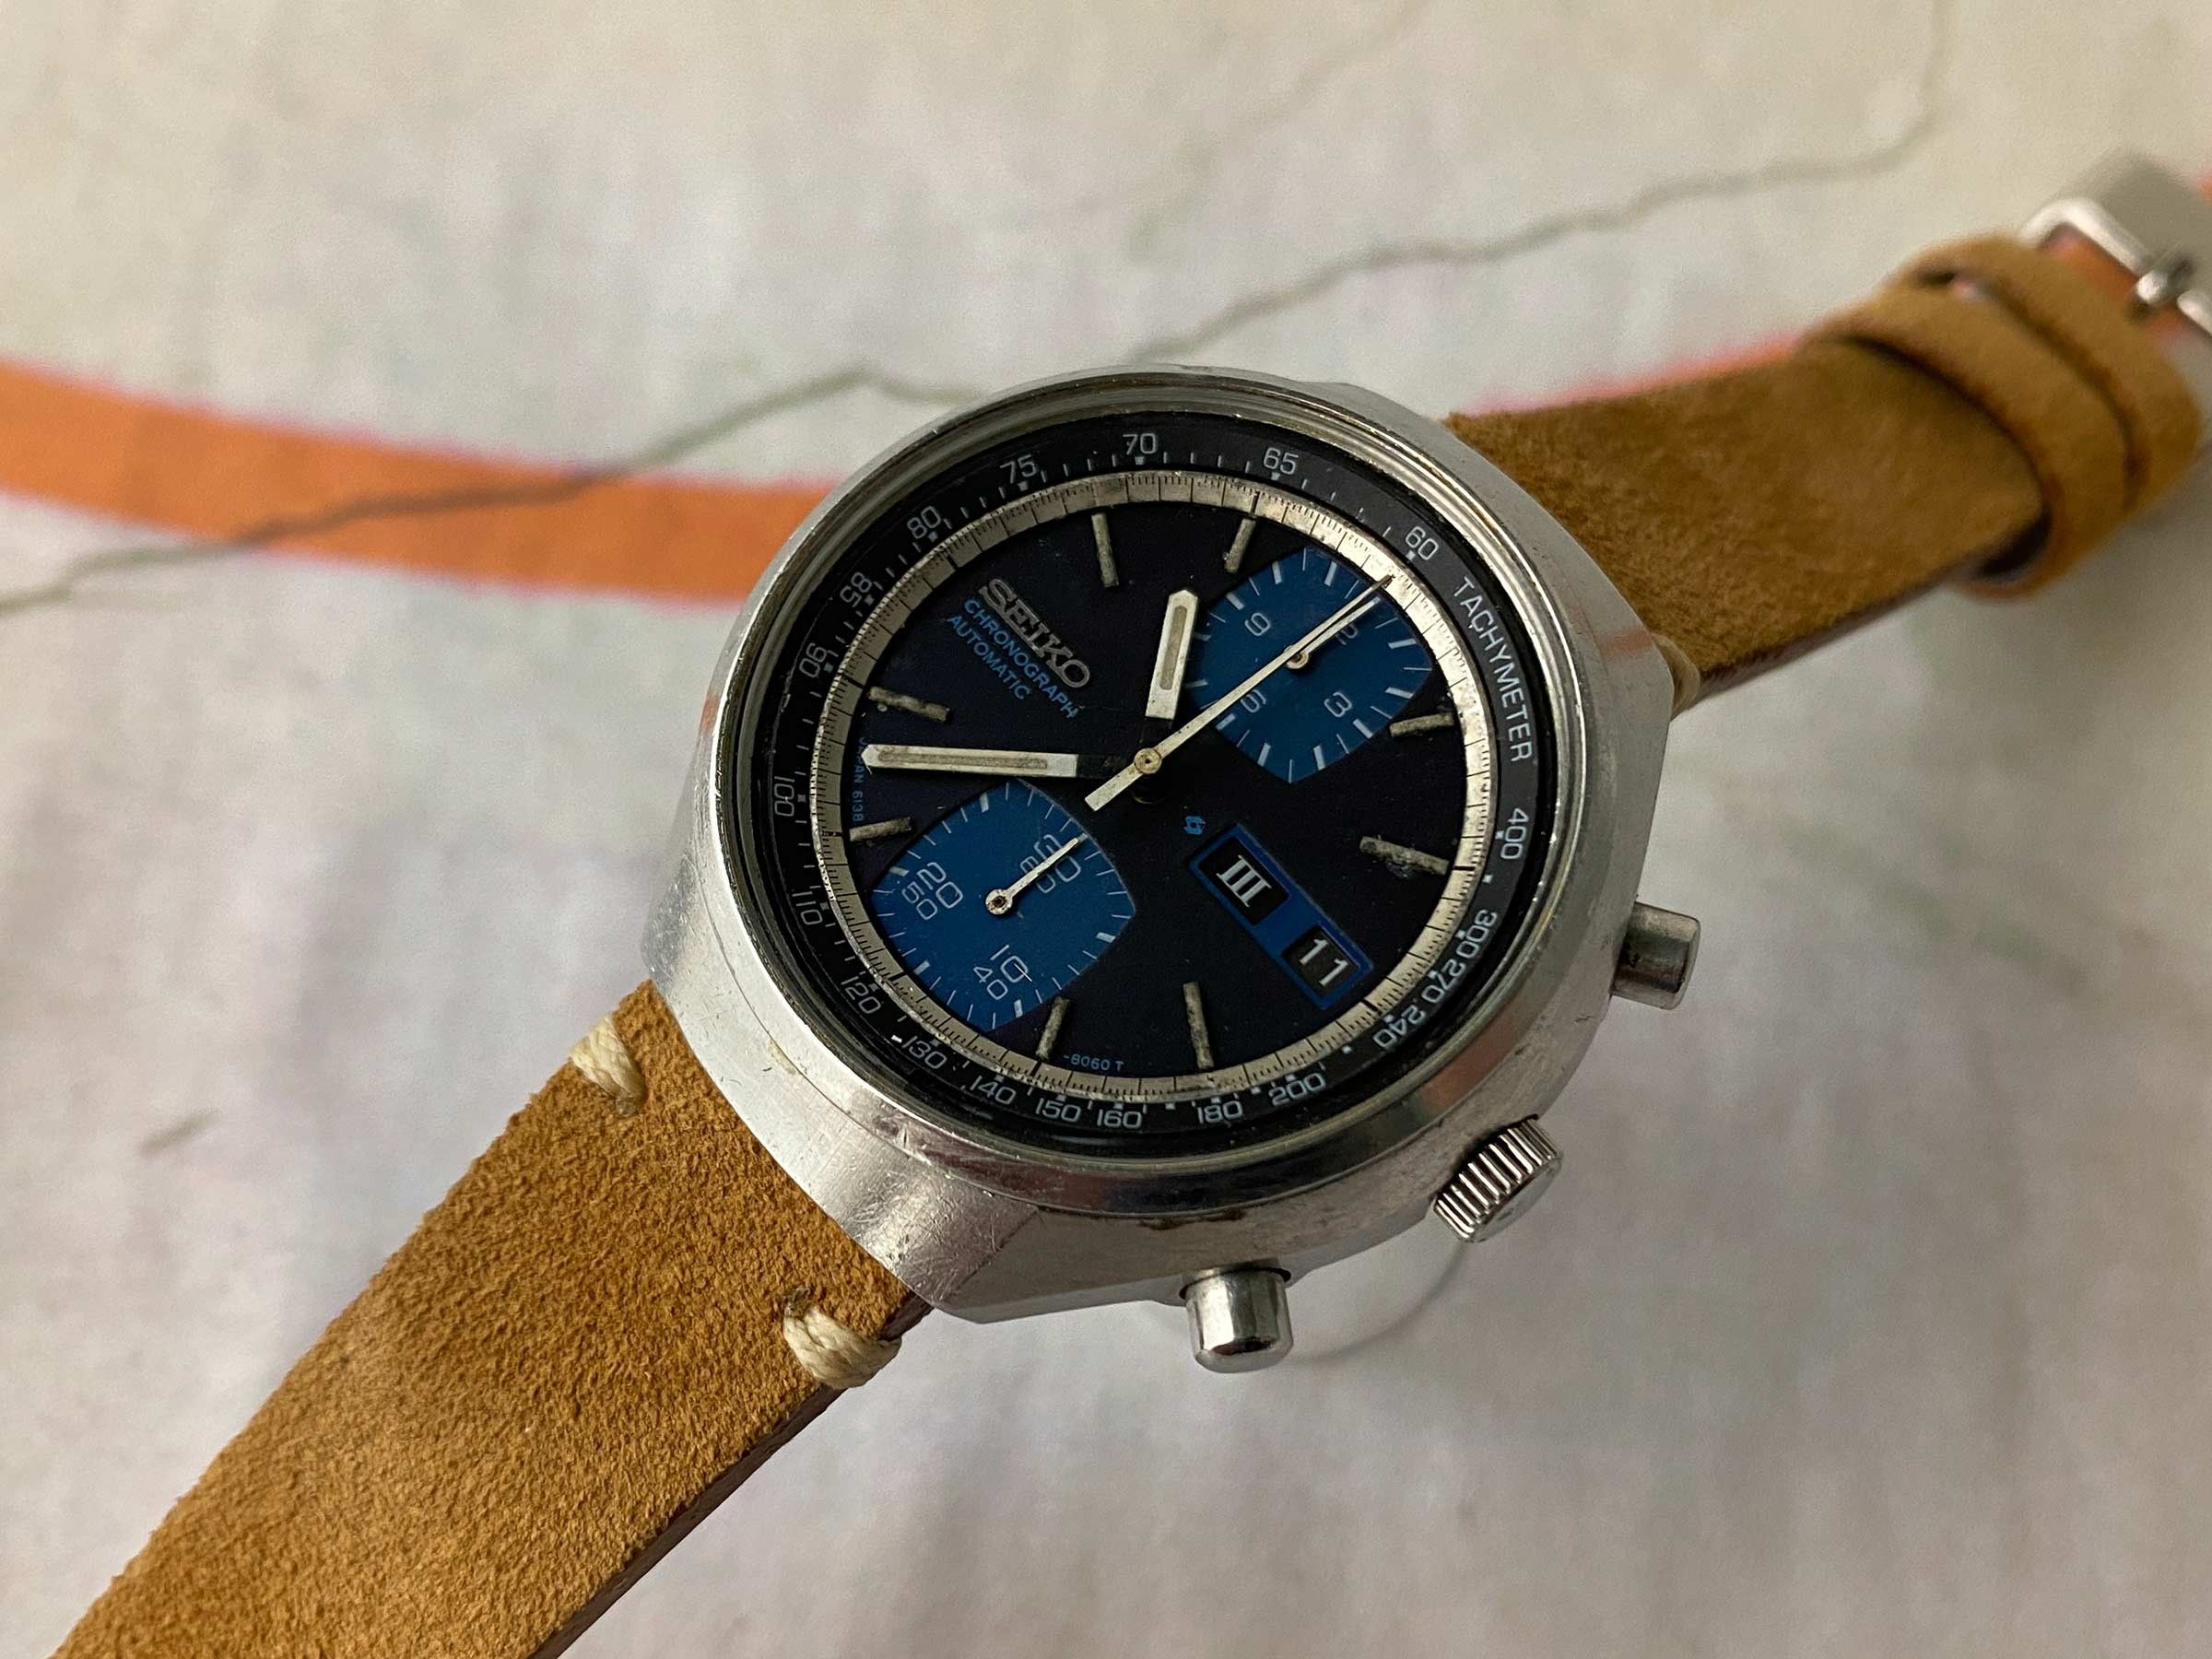 SEIKO Vintage automatic chronograph watch Ref. 6138-8030 Cal. 6138-B JAPAN  *** BLUE DIAL *** Seiko Vintage watches - Watches83